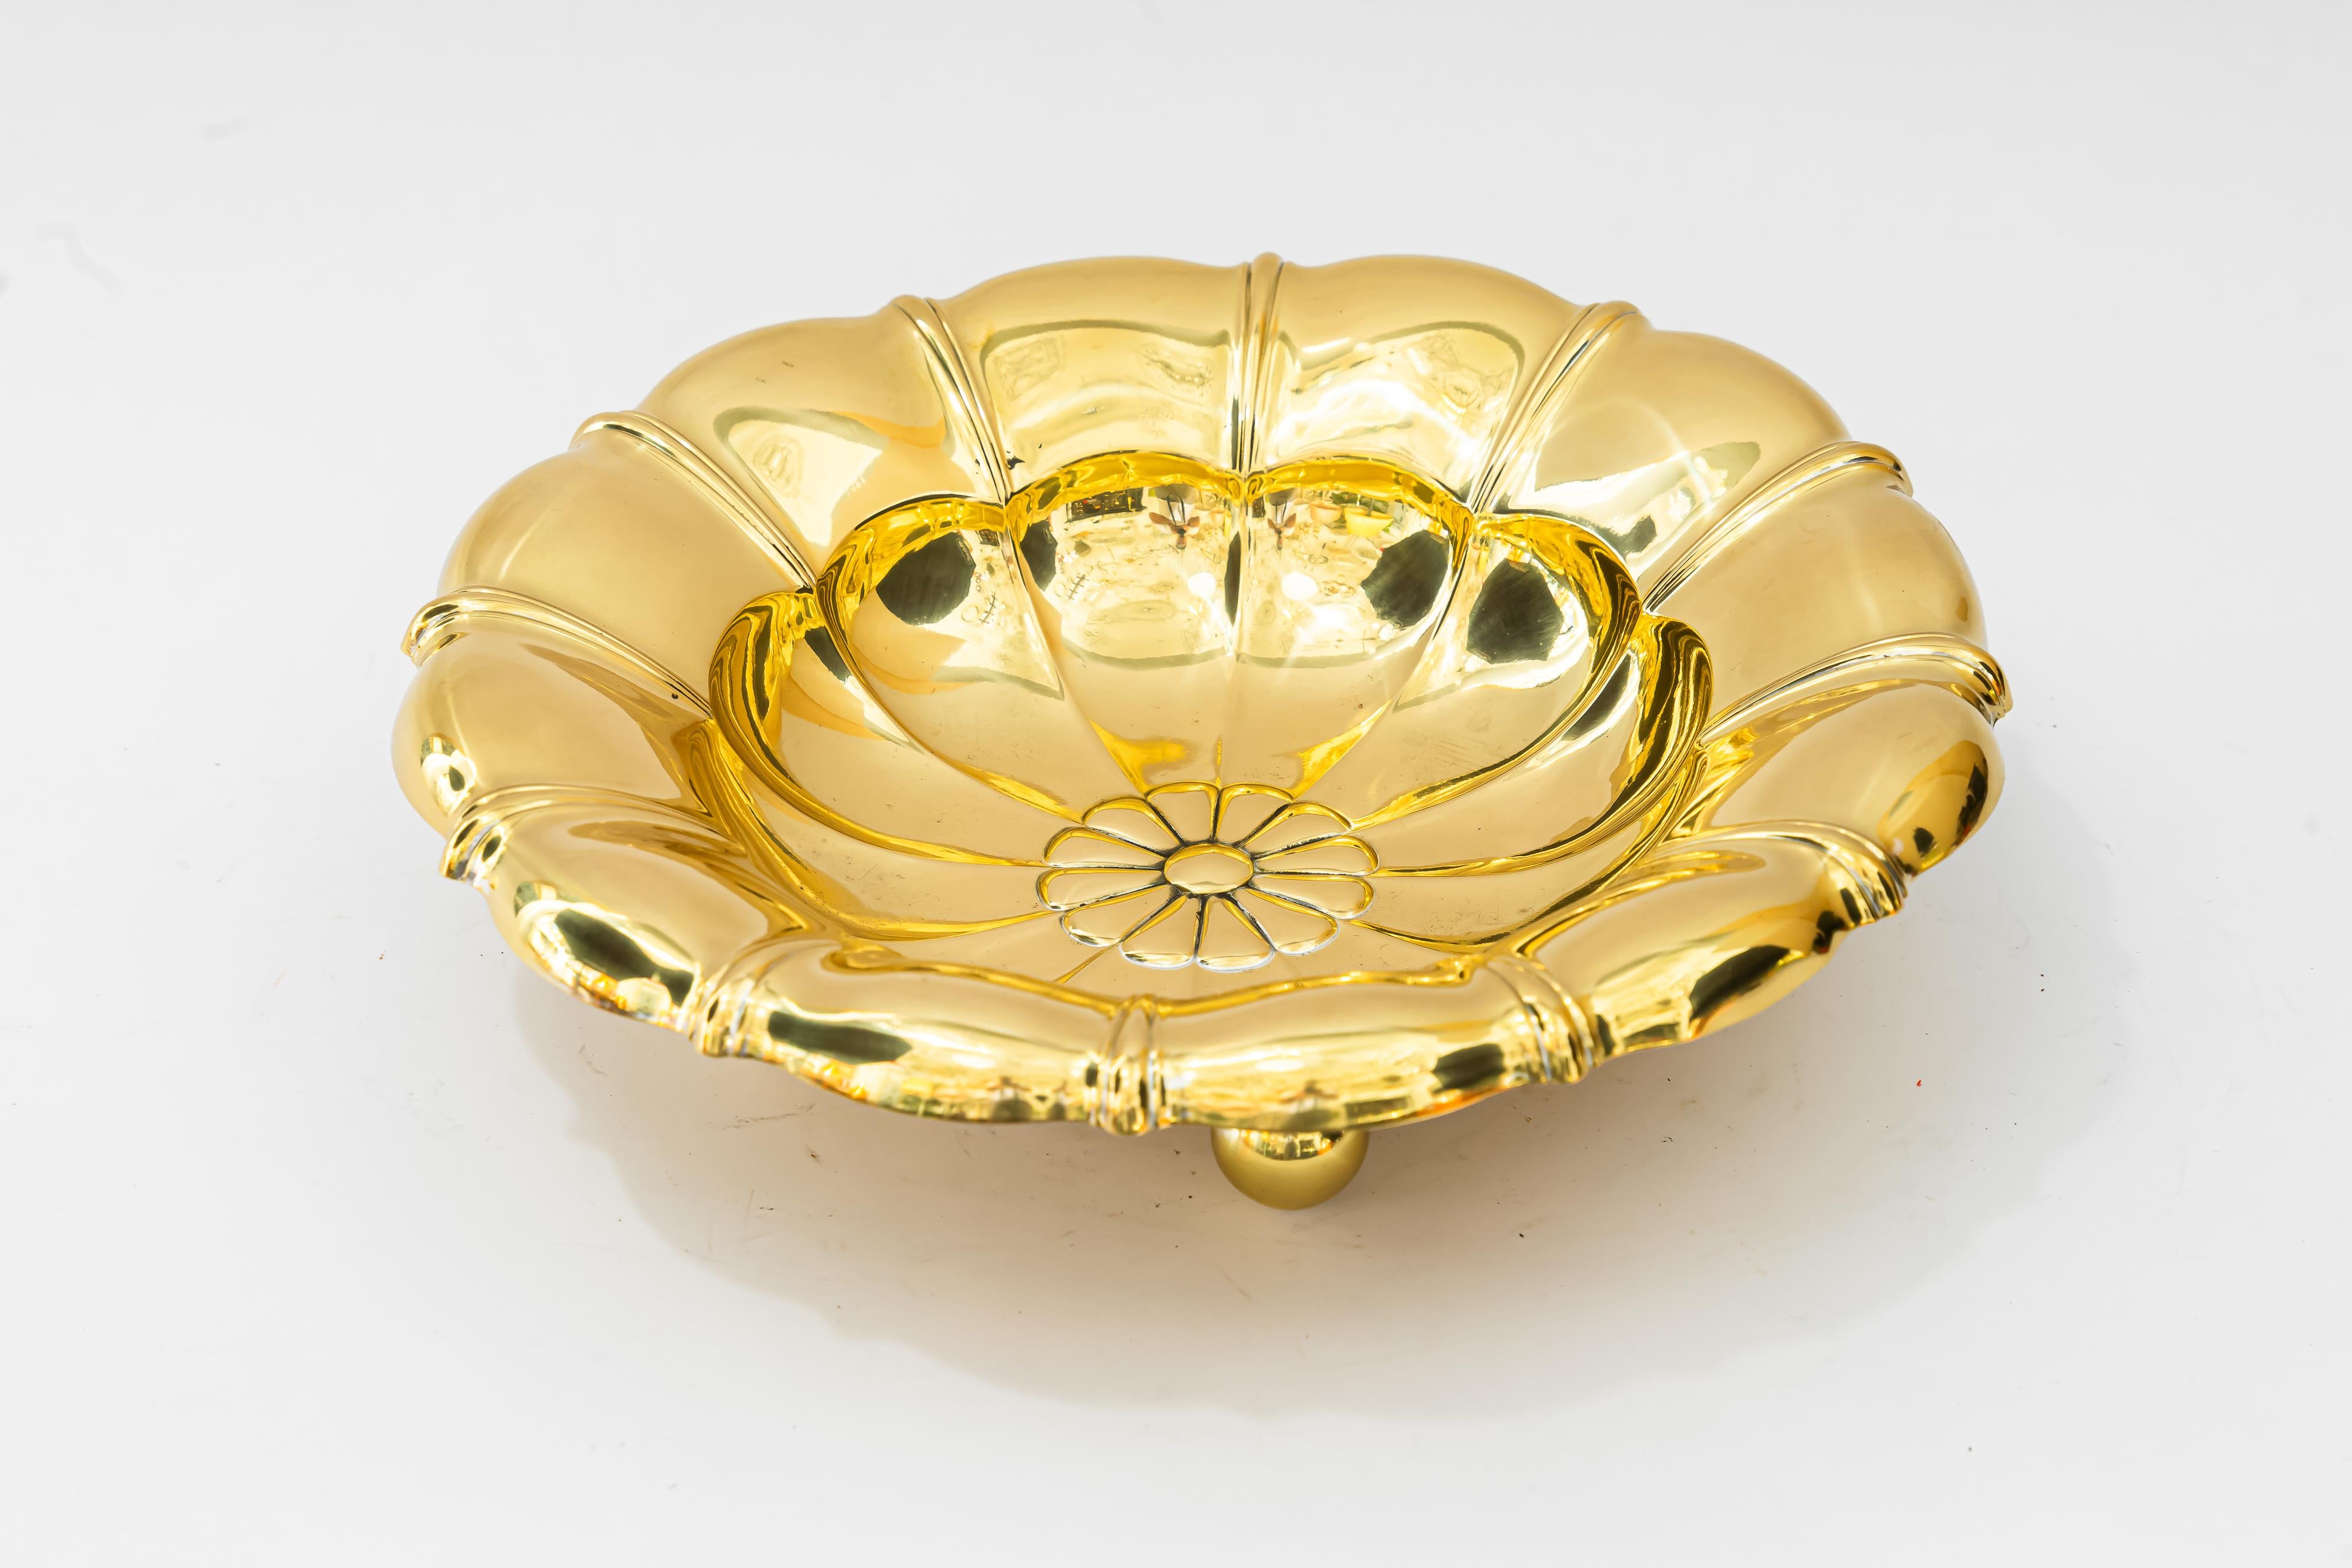 Art Deco Brass fruit bowl vienna around 1920s
Brass polished and stove enameled
